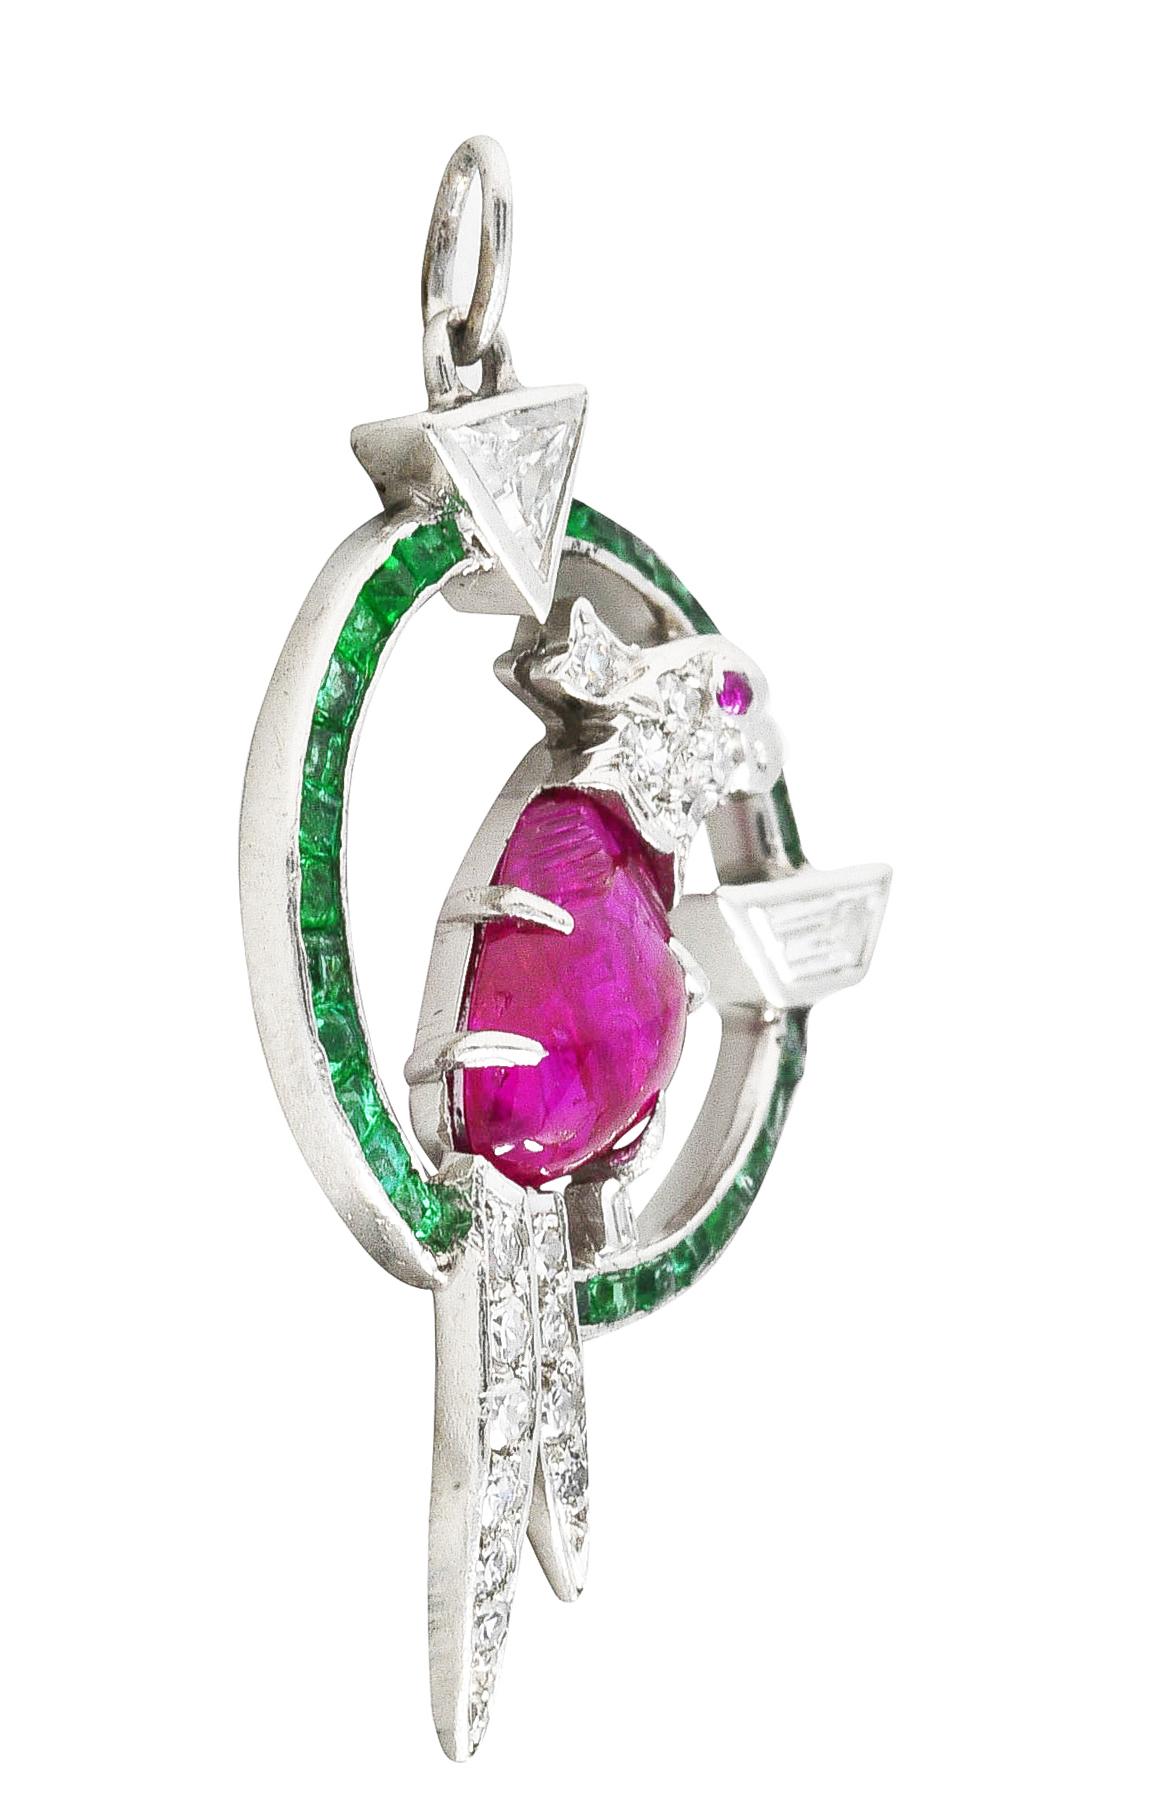 Circular charm features a perched cockatiel bird. Eye is a ruby cabochon matched to its Mughal carved cabochon ruby body. Surrounded by a halo of channel set calibrè cut emeralds - approximately 0.50 carat total. Well matched and bright green with